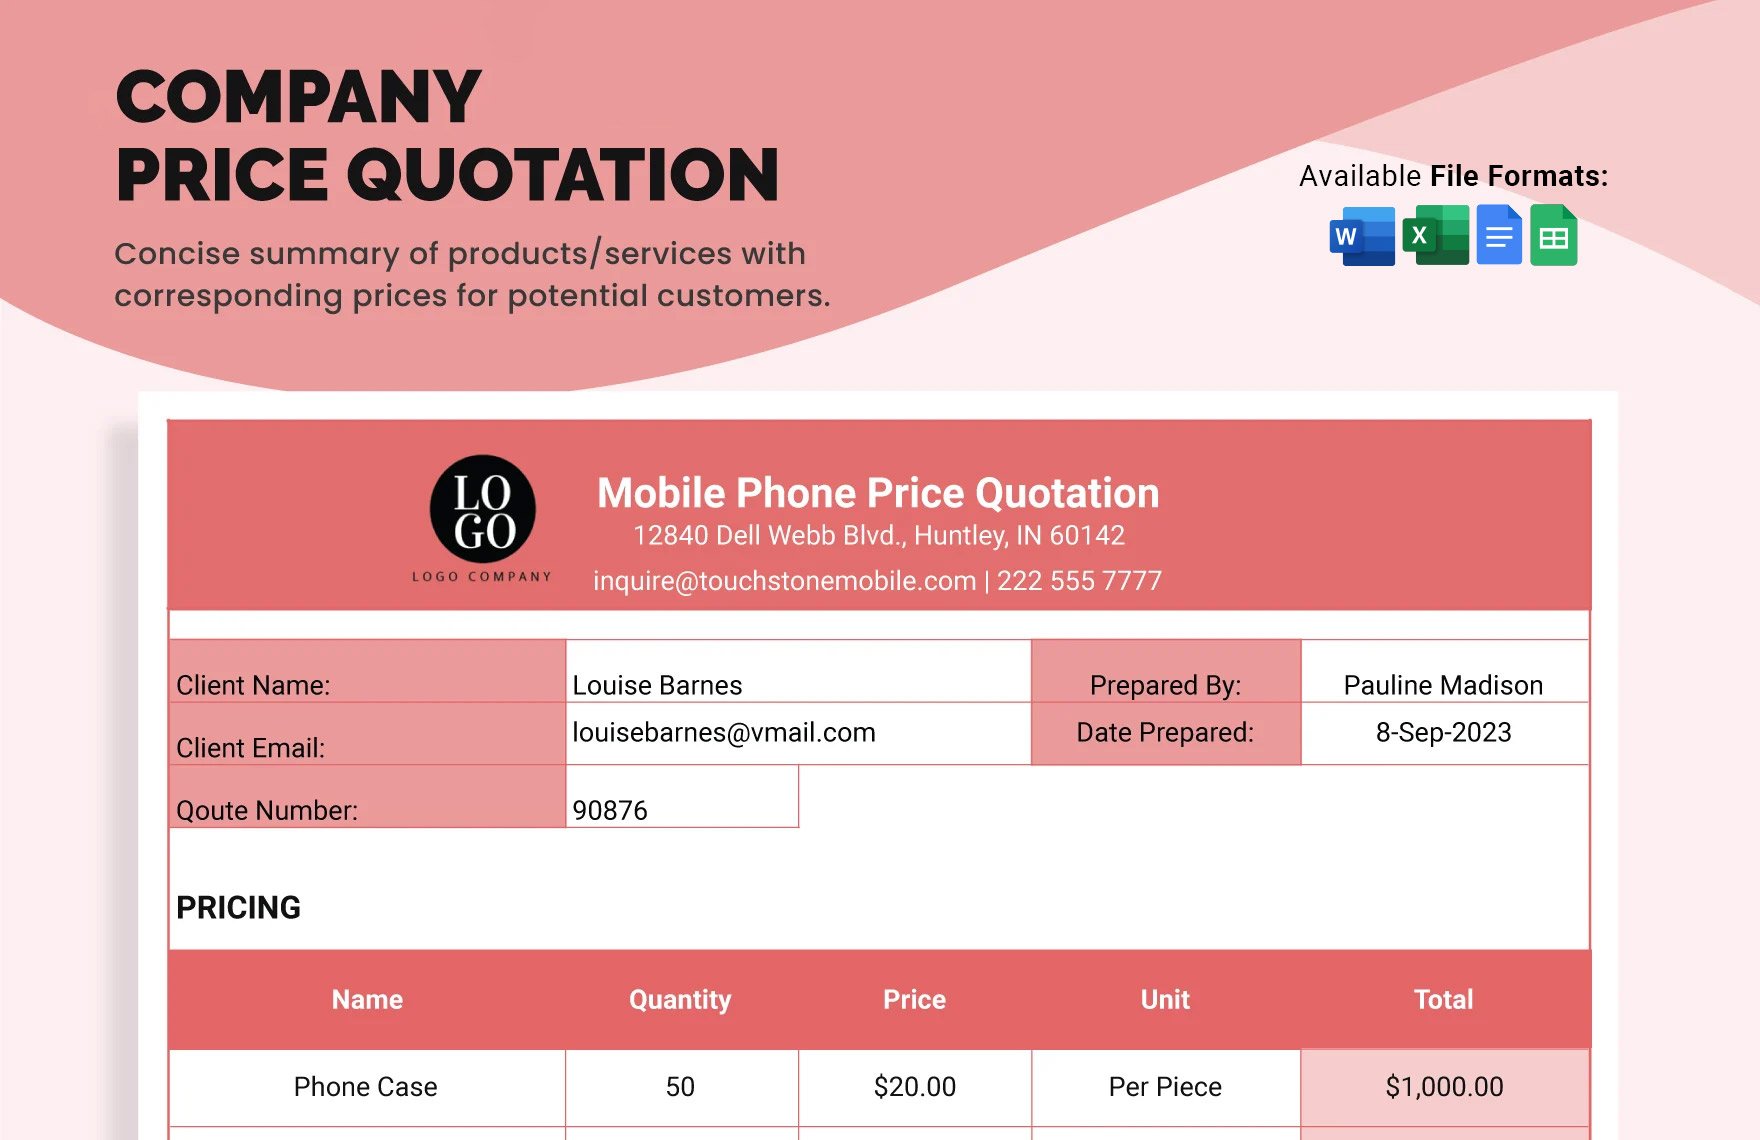 Free Company Price Quotation Template